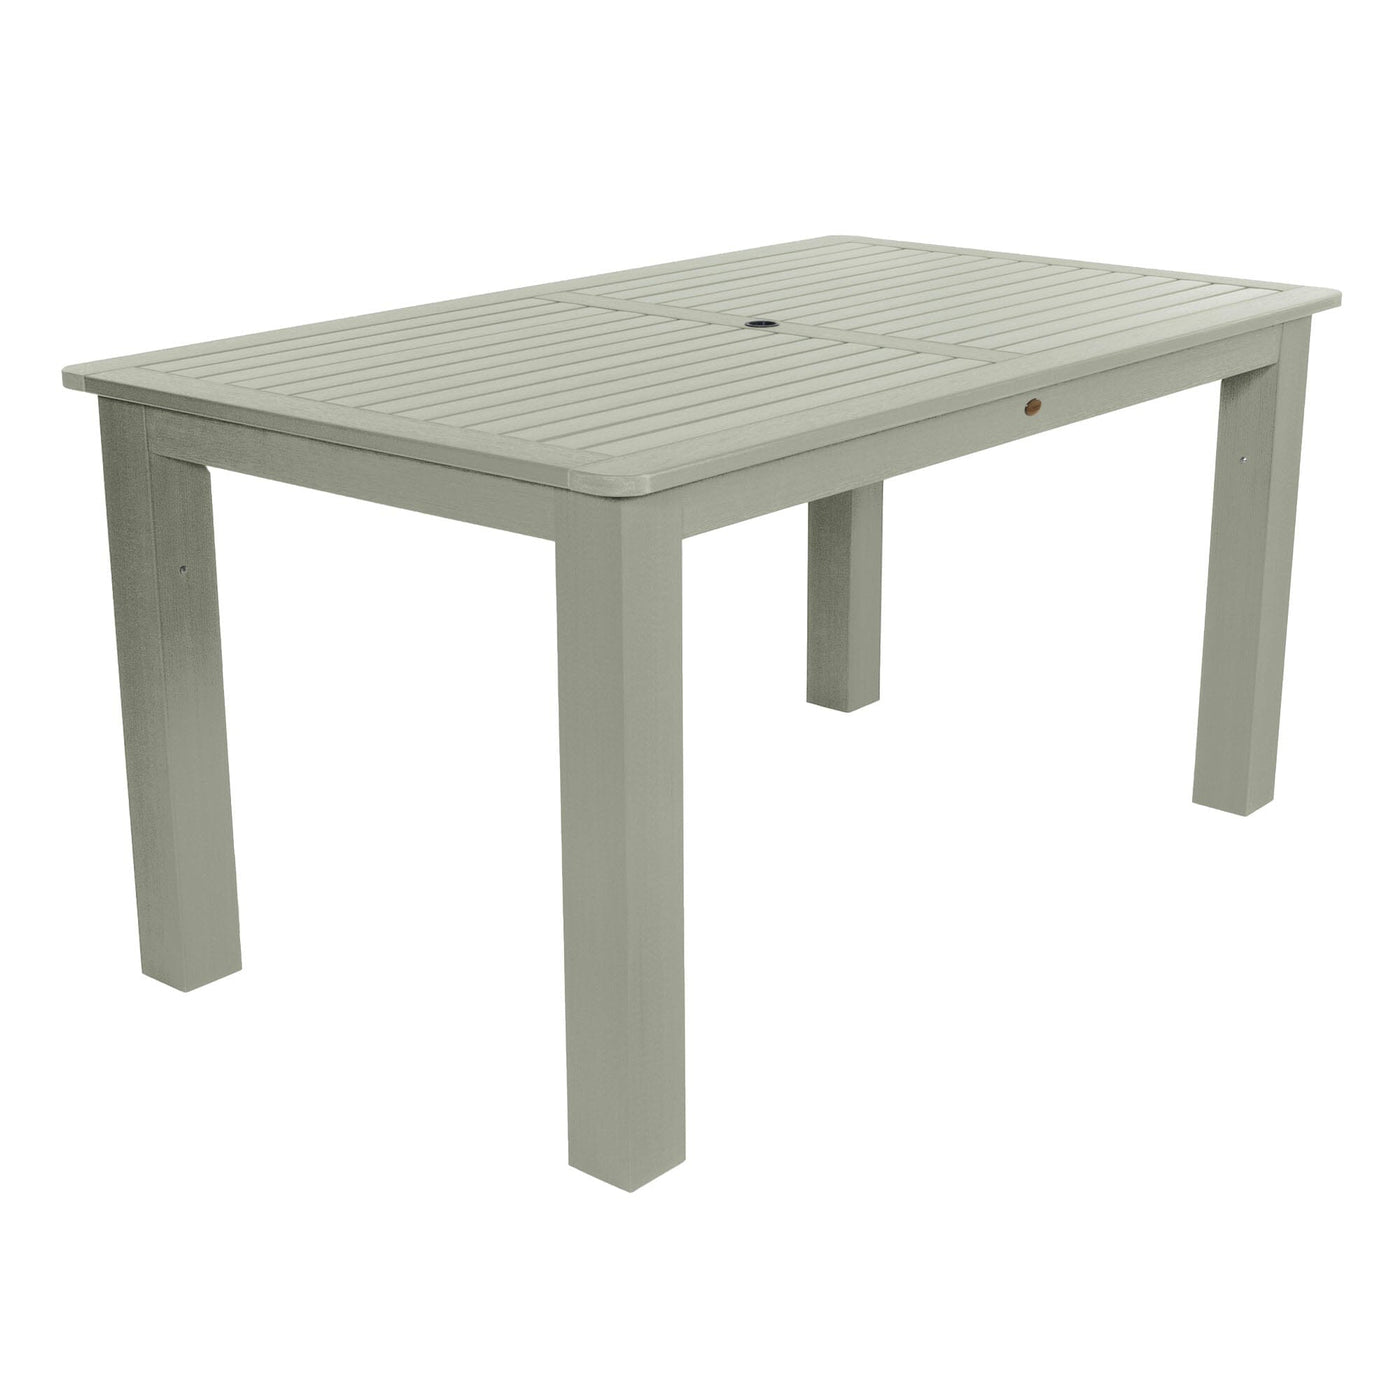 Rectangular 42in x 72in Outdoor Dining Table - Counter Height Dining Highwood USA Eucalyptus 